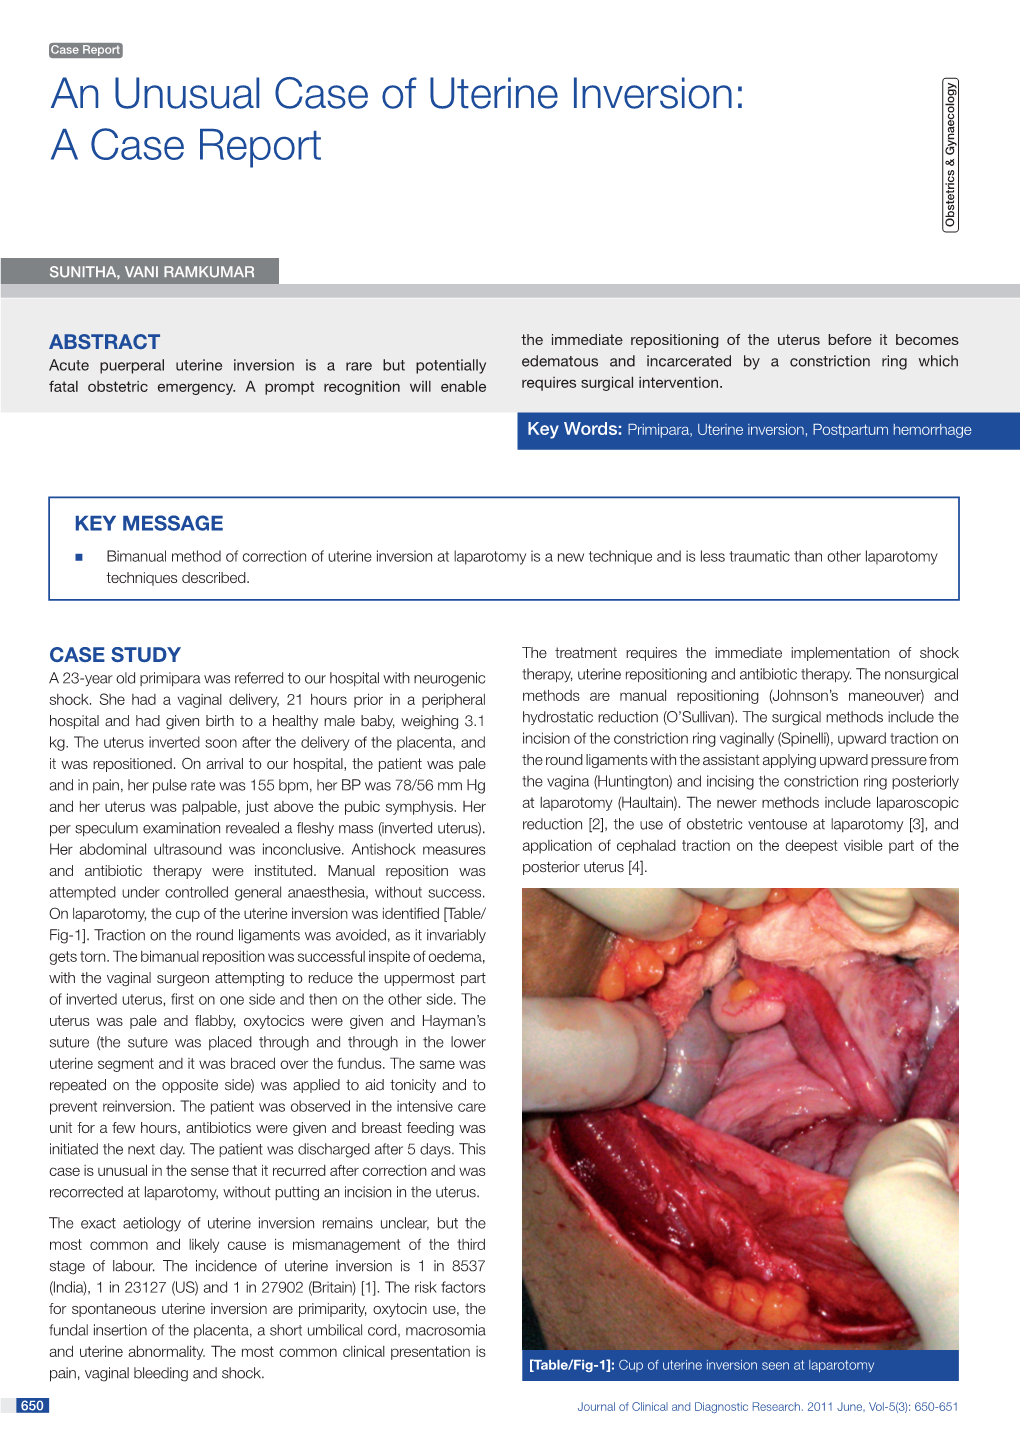 An Unusual Case of Uterine Inversion: a Case Report Obstetrics & Gynaecology